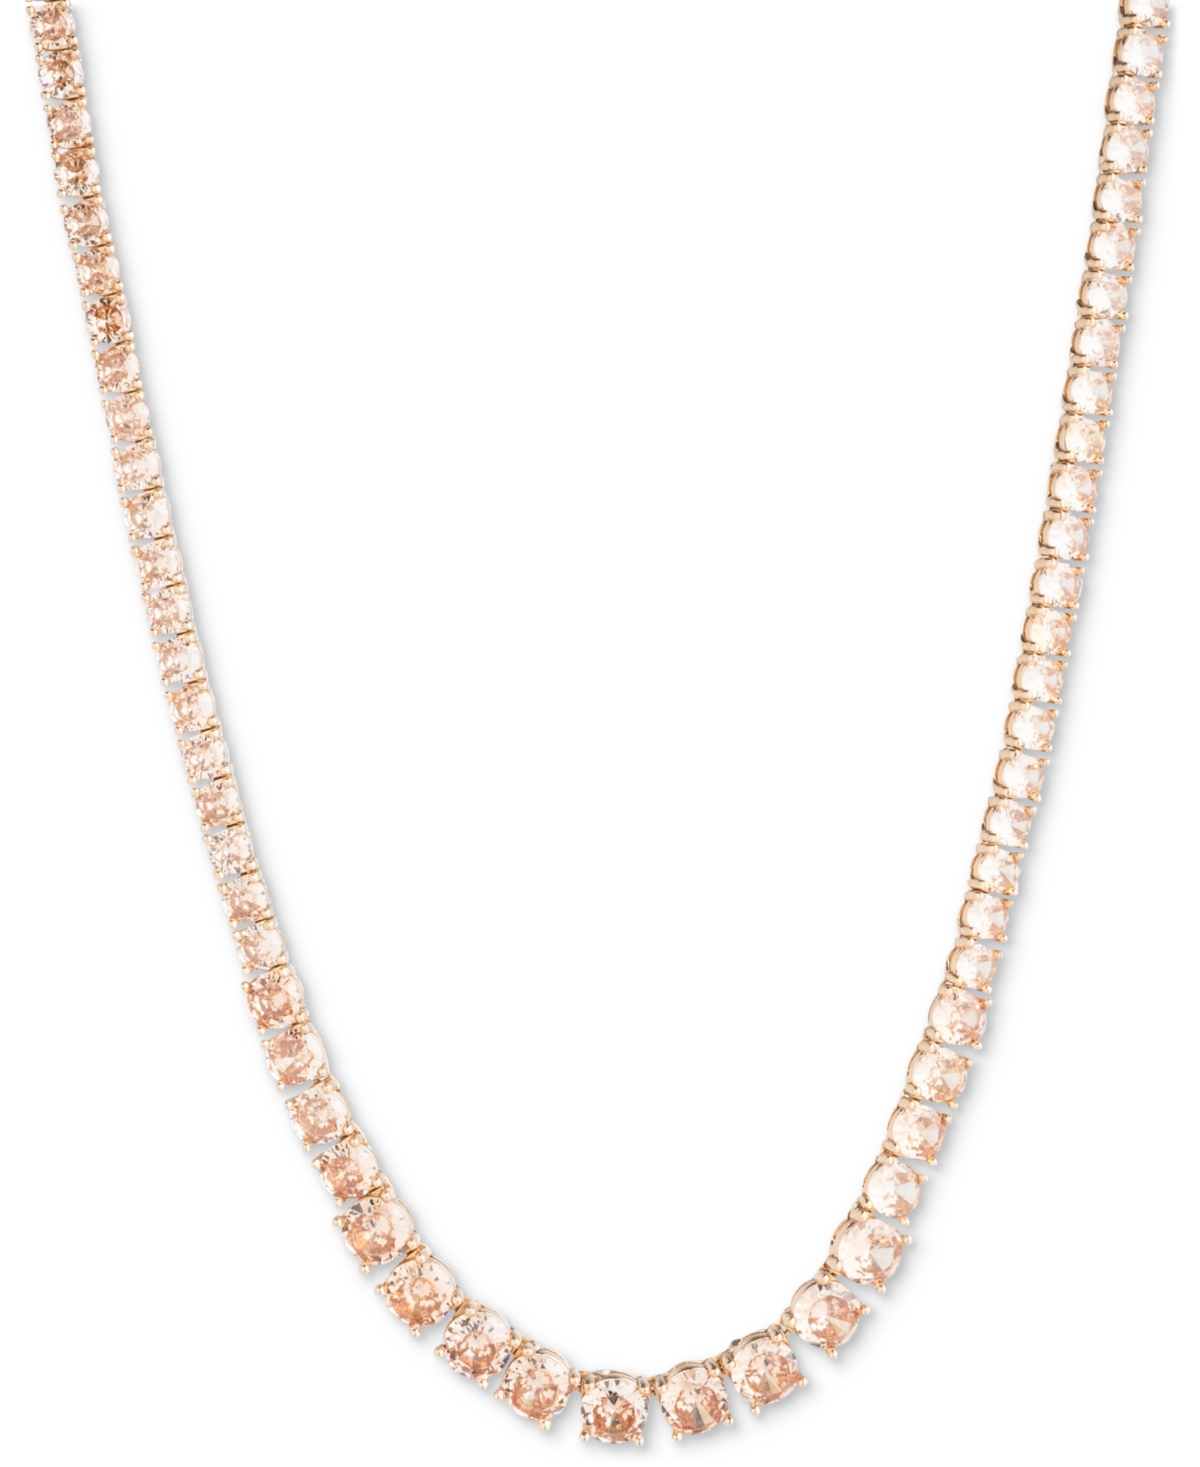 Gold-Tone Champagne Stone Collar Necklace, 16" + 3" extender - Champagne